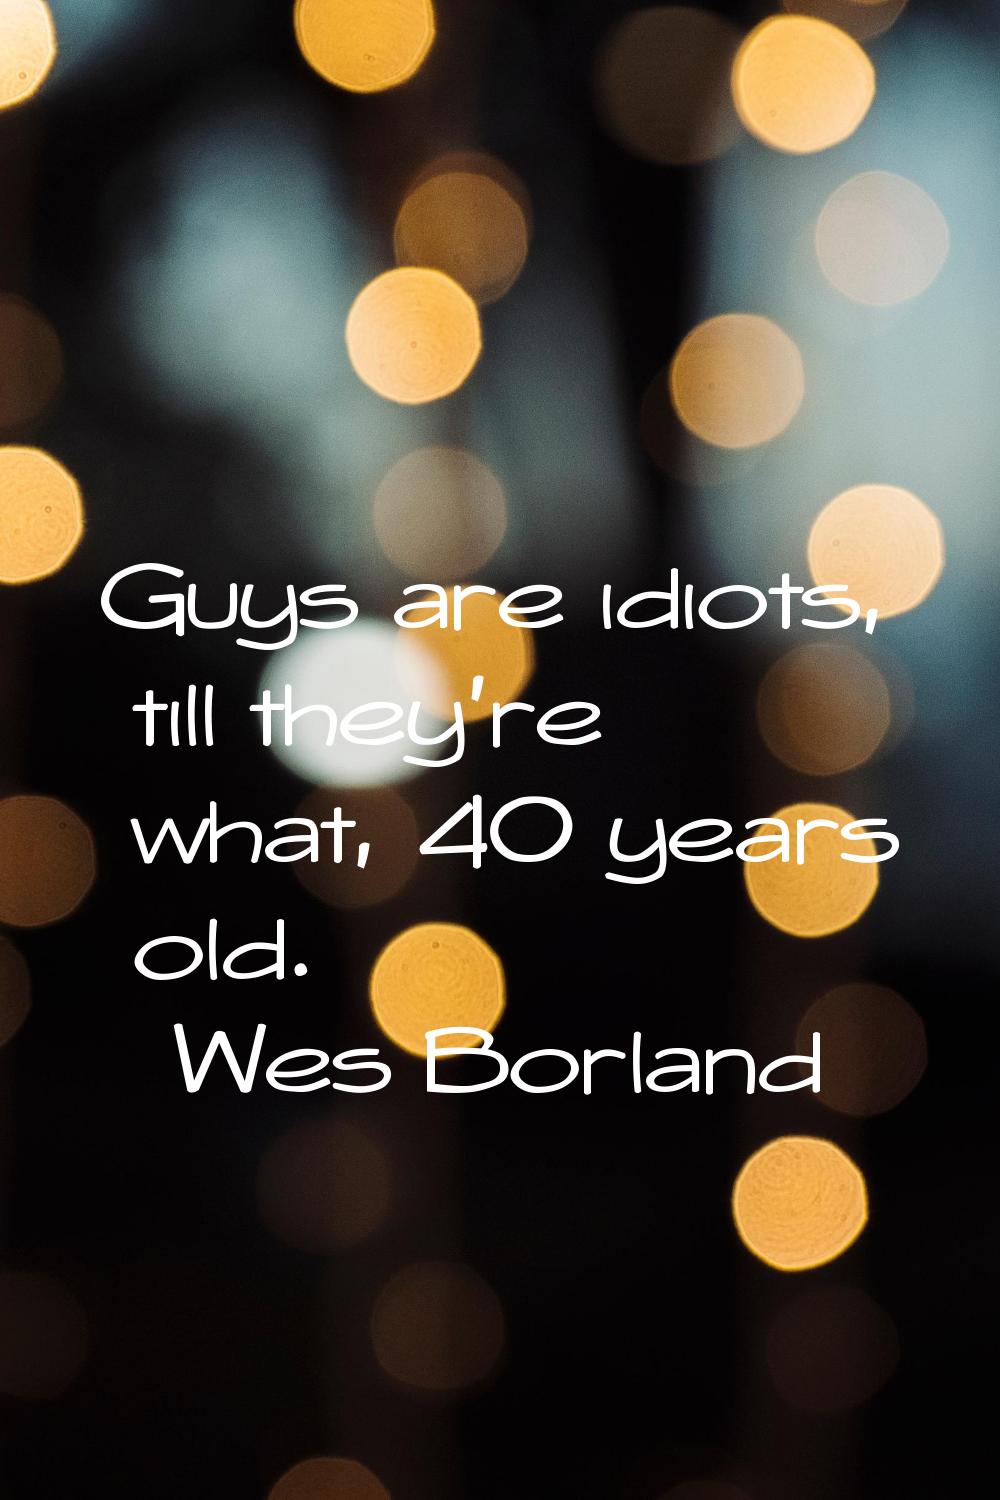 Guys are idiots, till they're what, 40 years old.